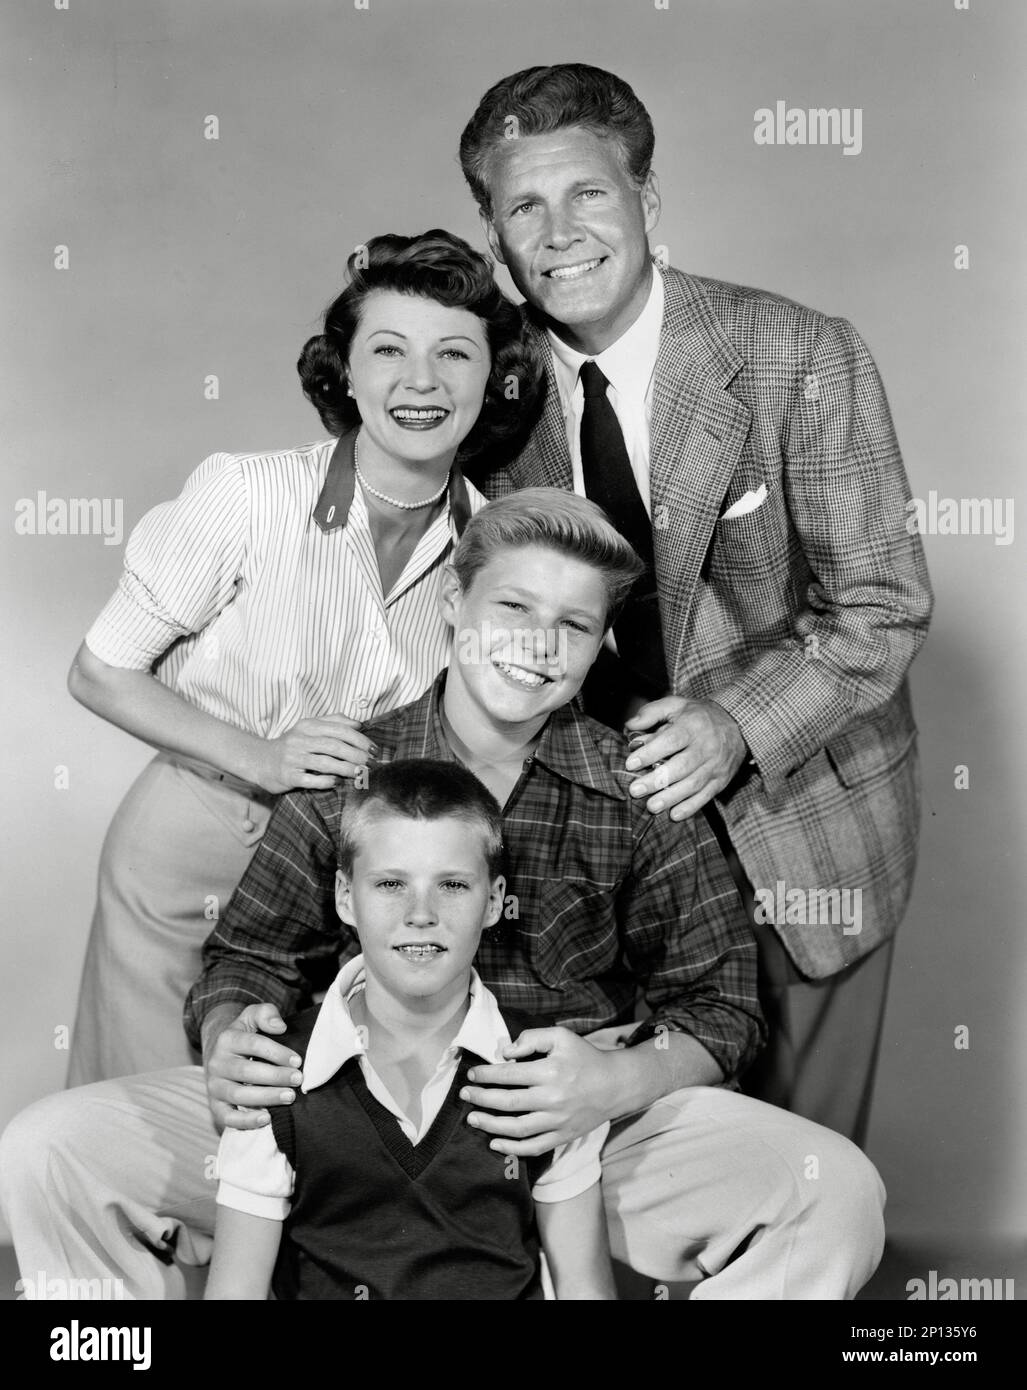 Harriet Nelson, Ozzie Nelson, David Nelson, Ricky Nelson (la famille Nelson), « The Adventures of Ozzie and Harriet » vers 1952 American International. Référence du dossier no 34408-317THA Banque D'Images